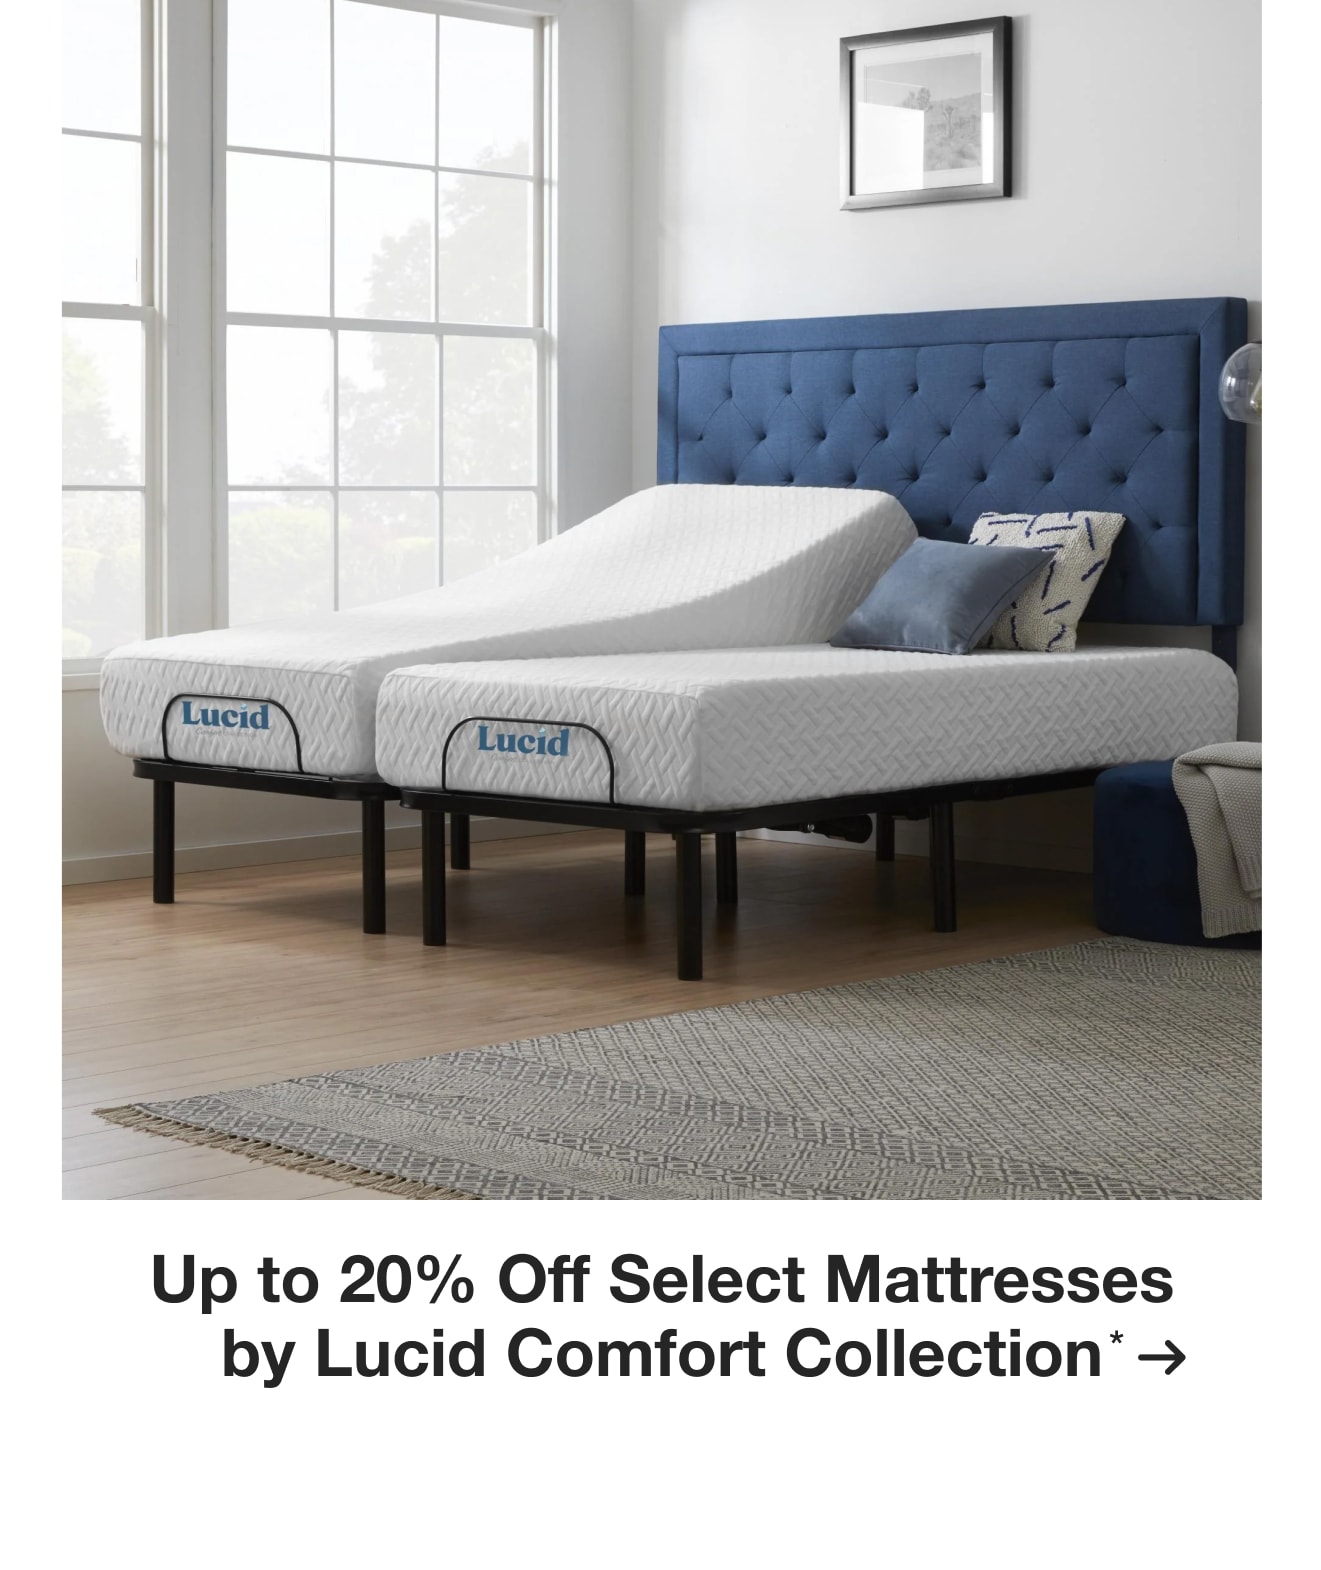 Up to 20% Off Select Mattresses by Lucid Comfort Collection*